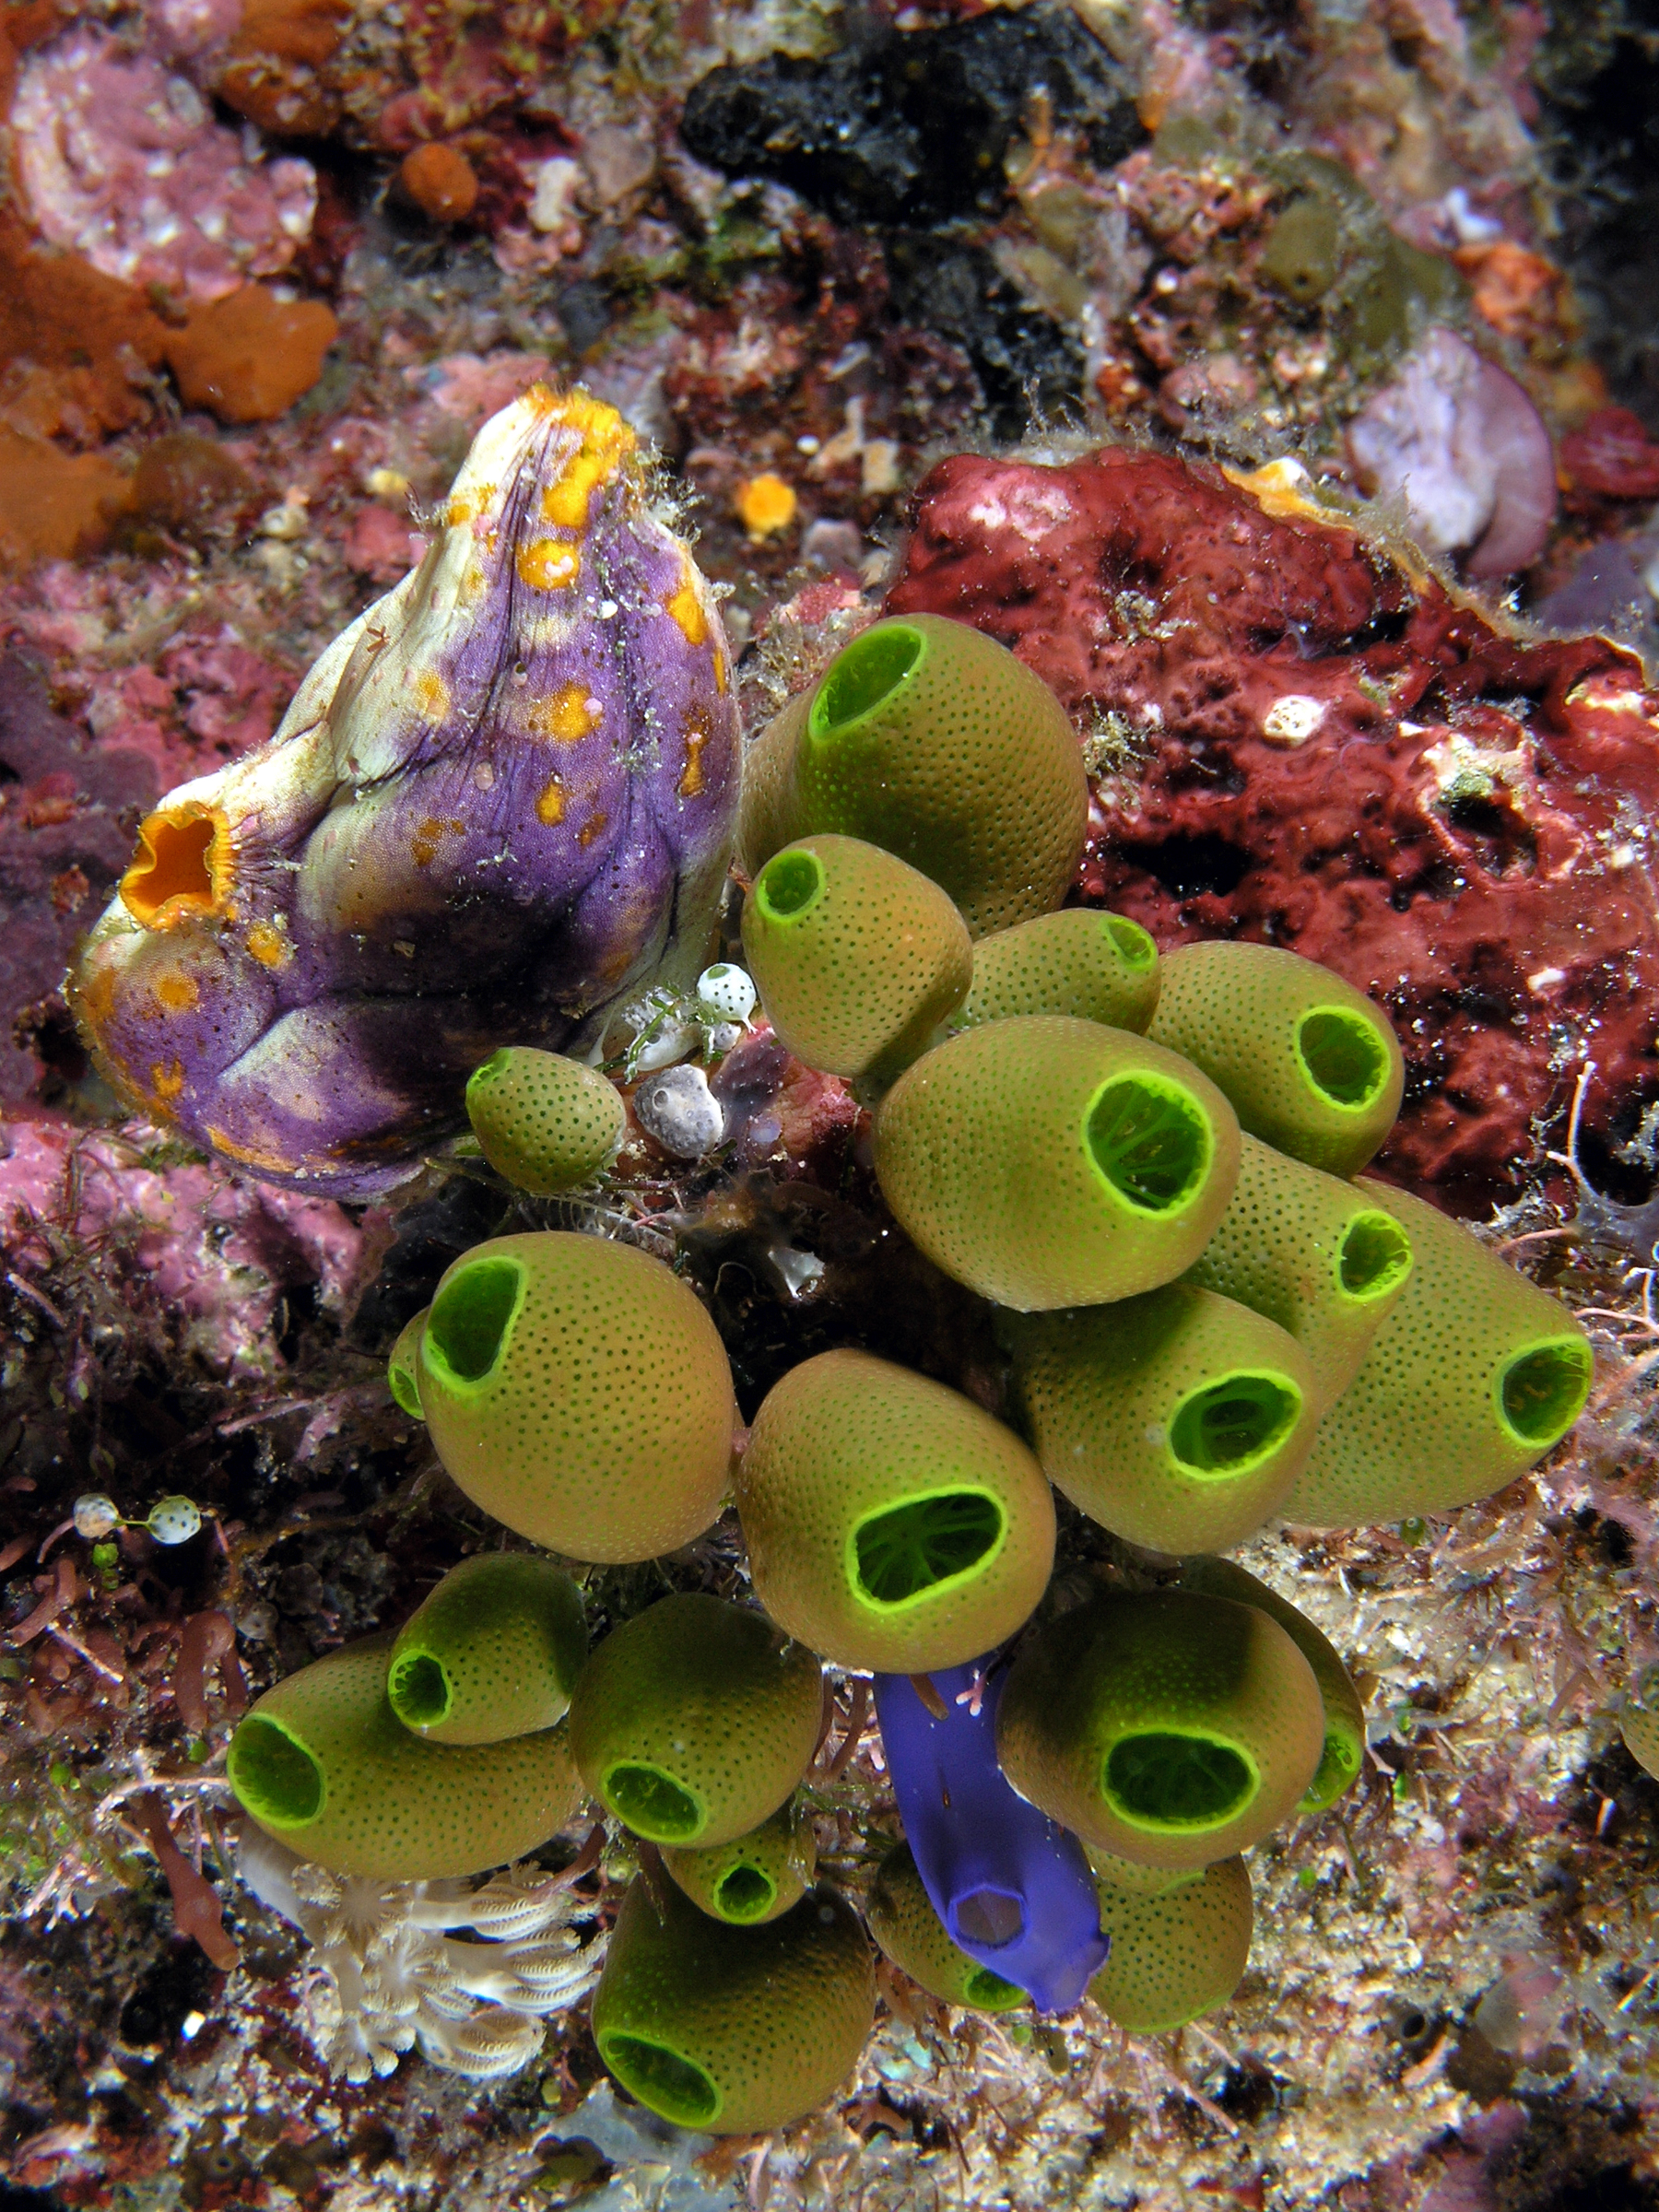 underwater image of tunicates and sponges, including a orange, purple, and offwhite multicoloured species, and vibrantly royal blue one set in amongst bright green sponges.